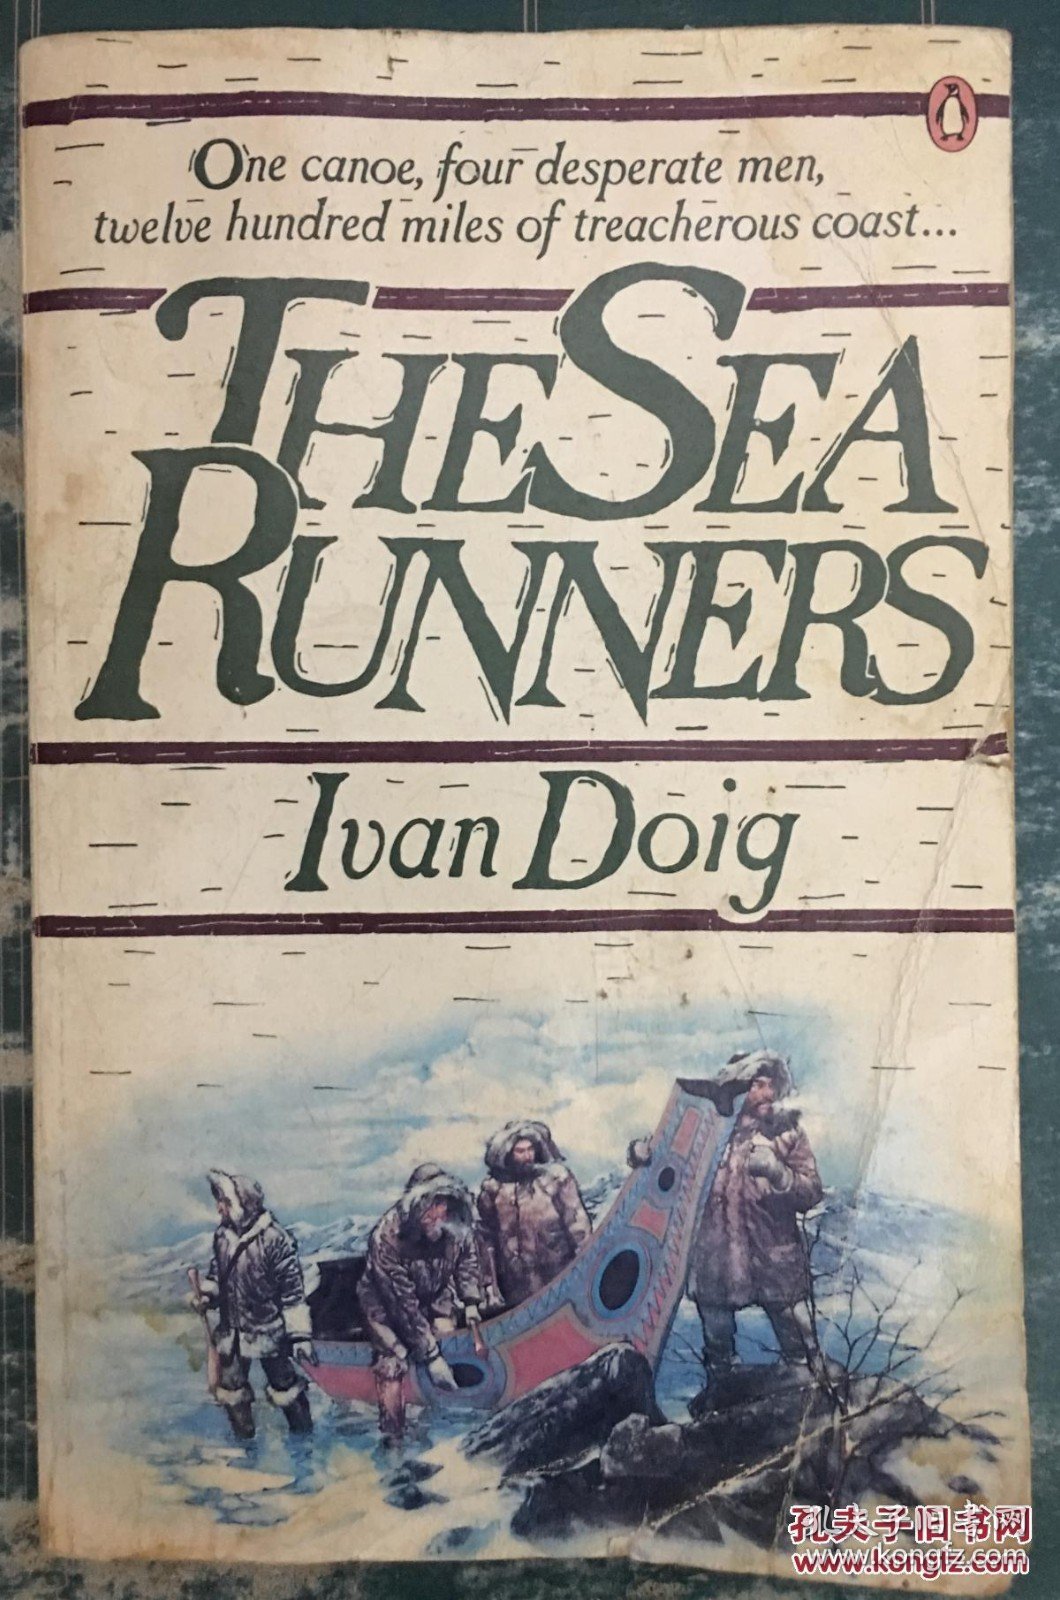 The Sea Runners (Contemporary American Fiction)